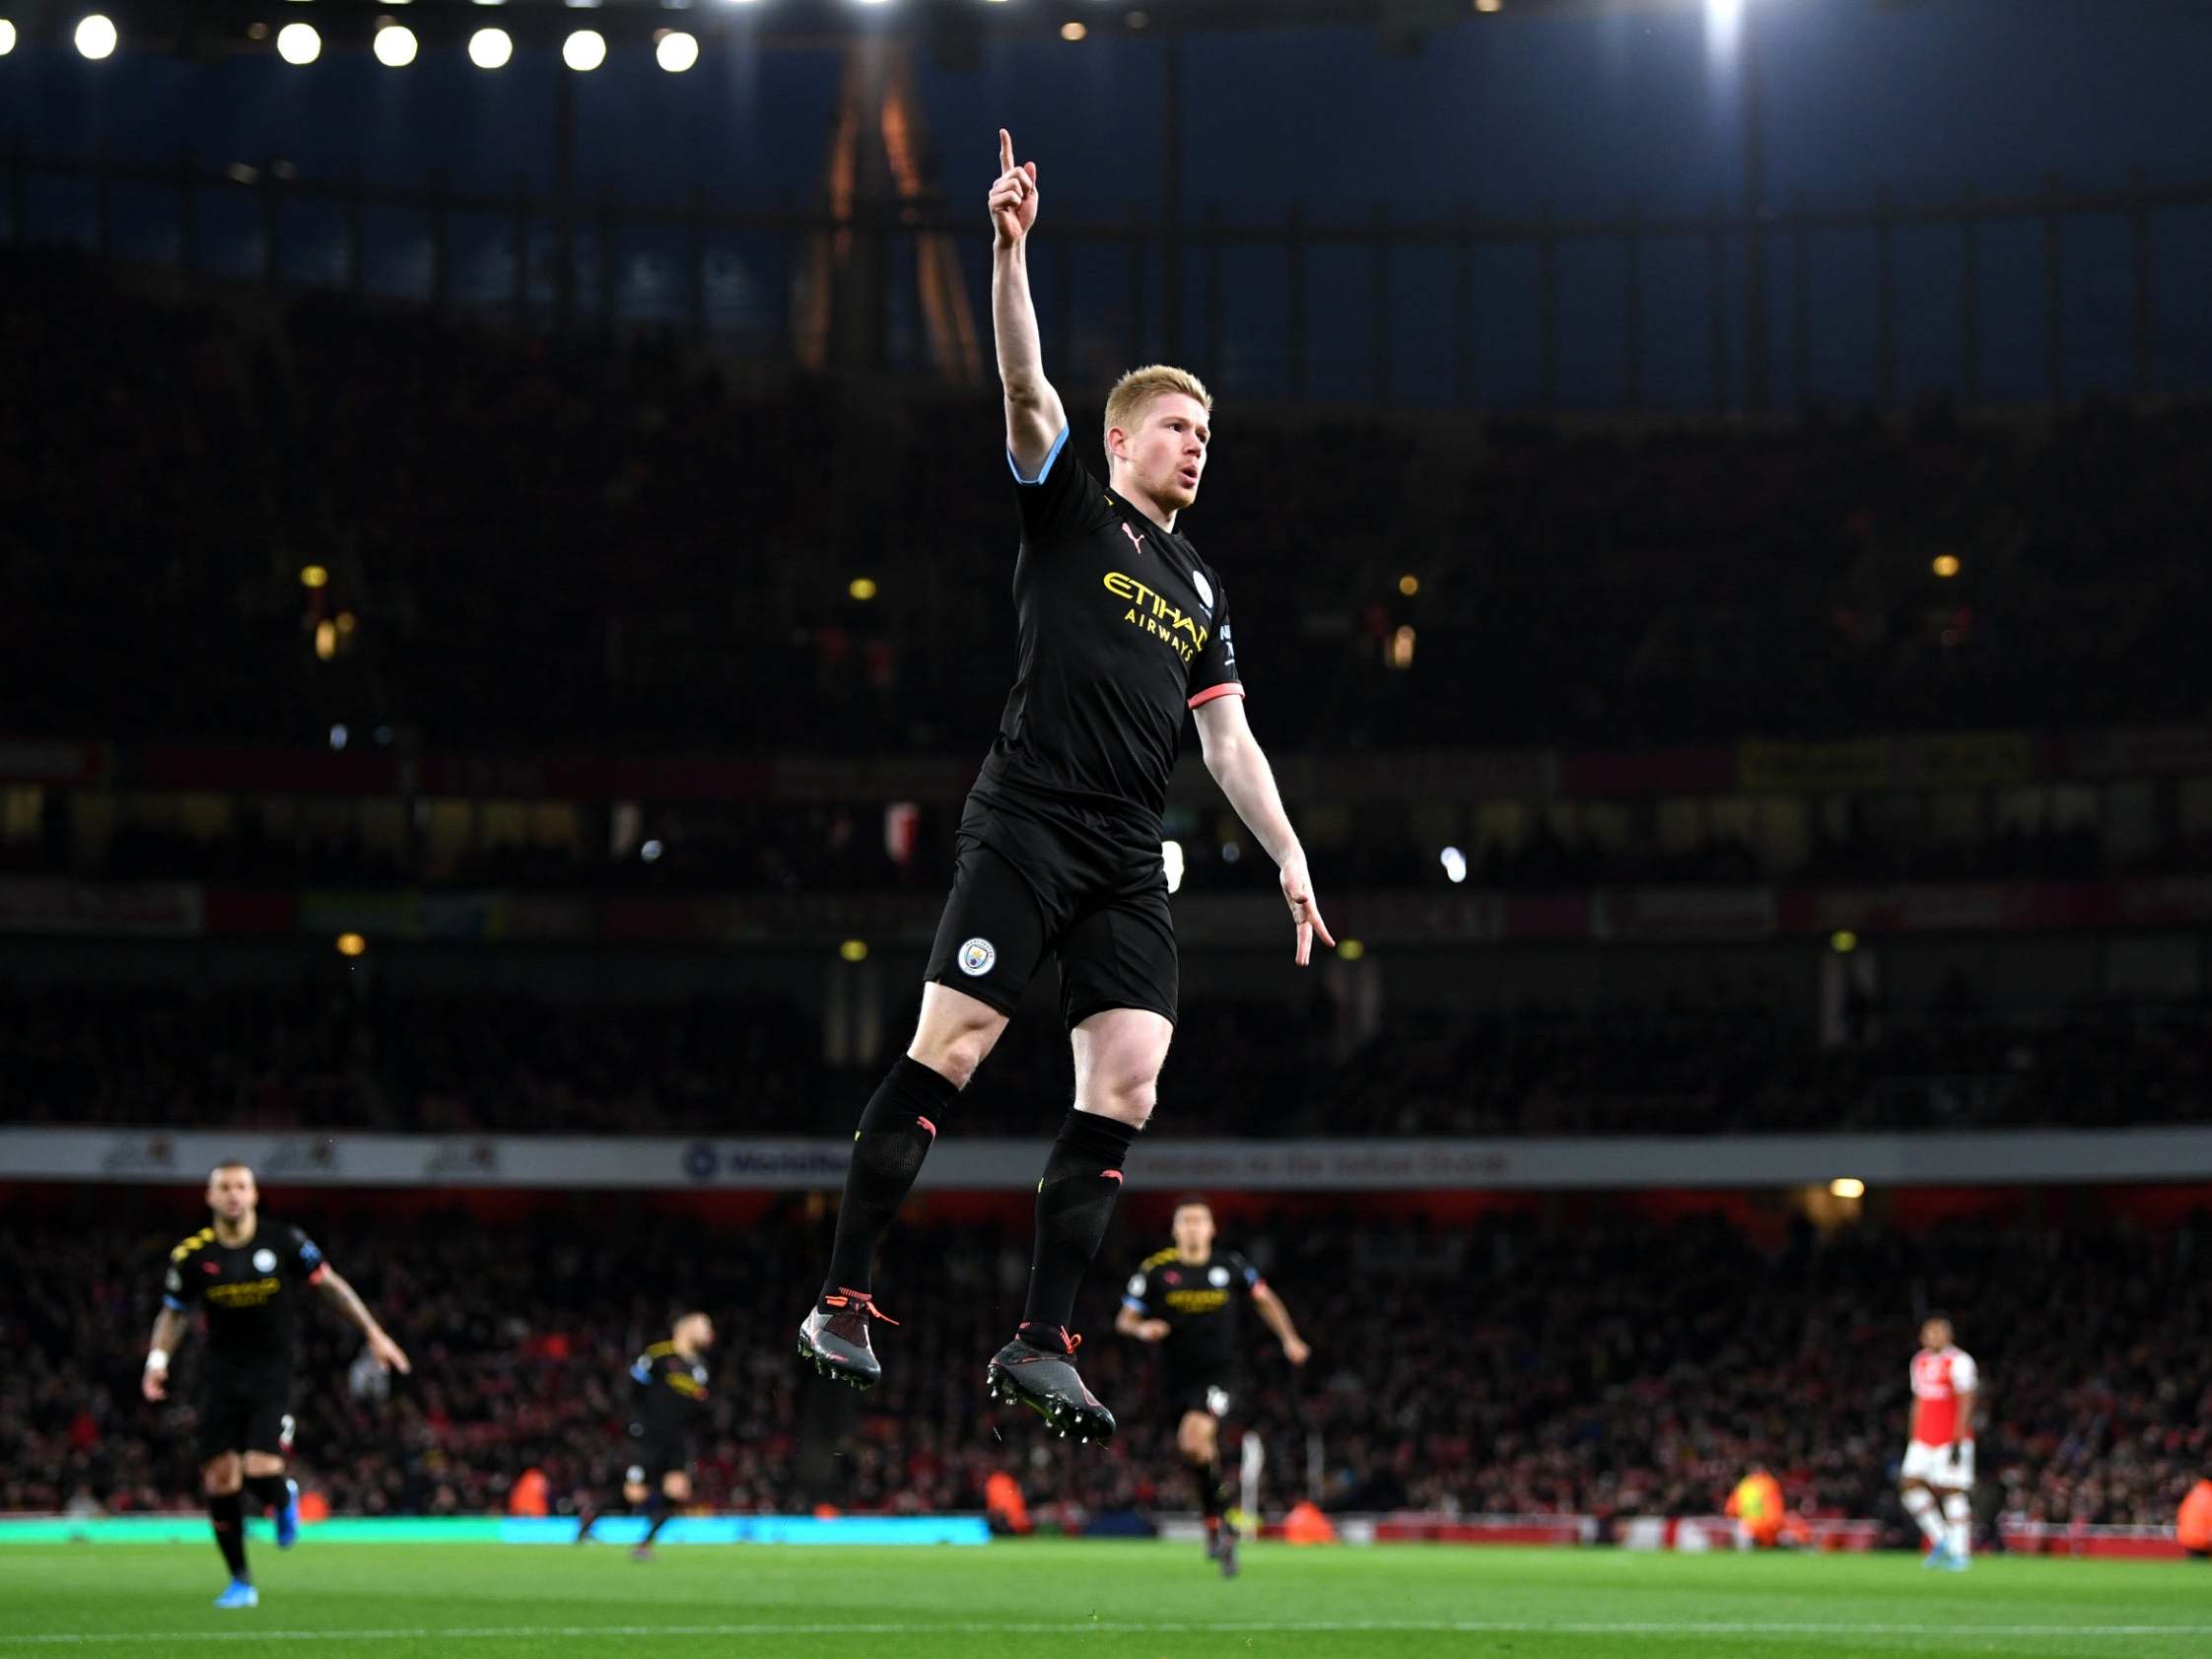 Kevin De Bruyne produced one of the season's outstanding solo displays